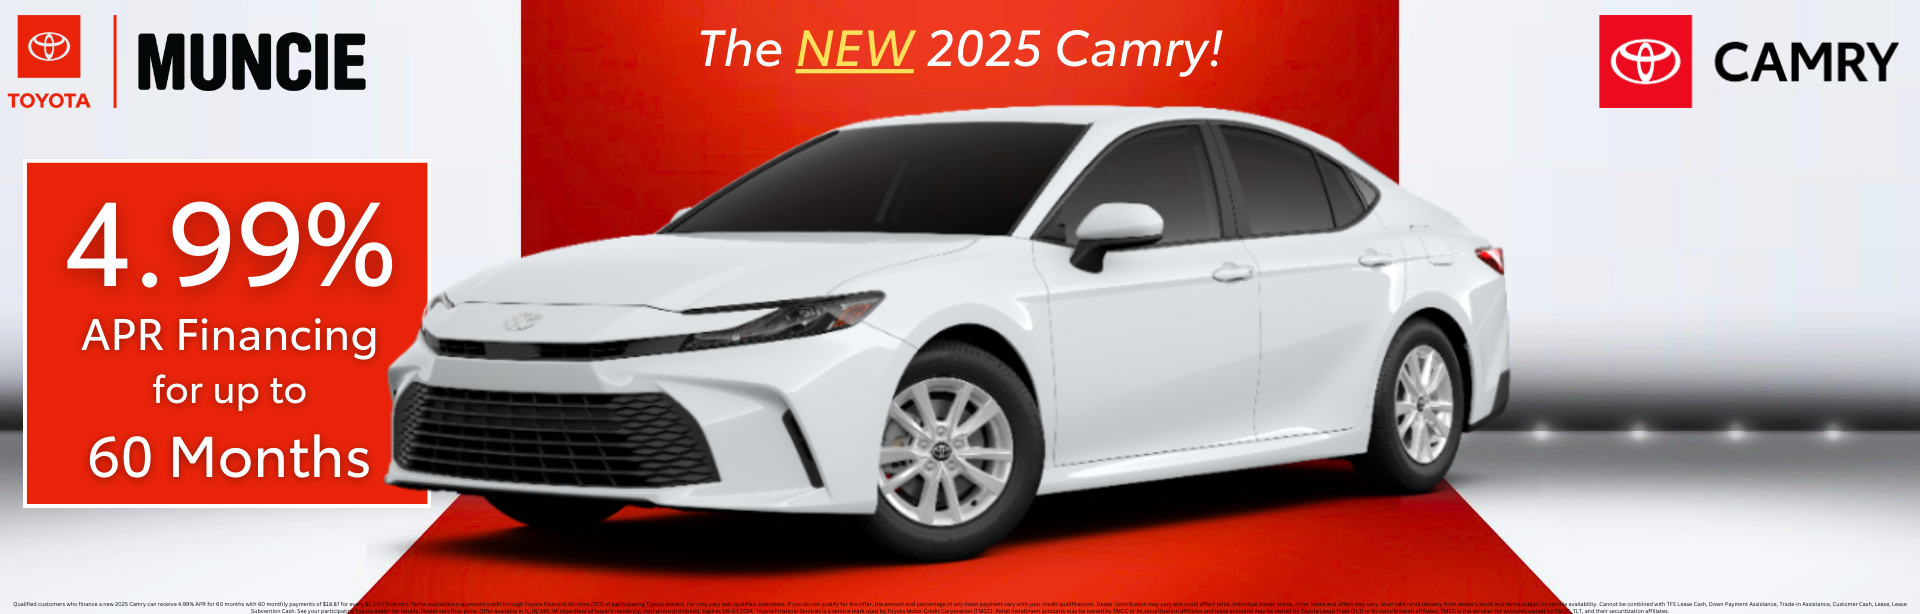 The NEW Camry at Toyota of Muncie